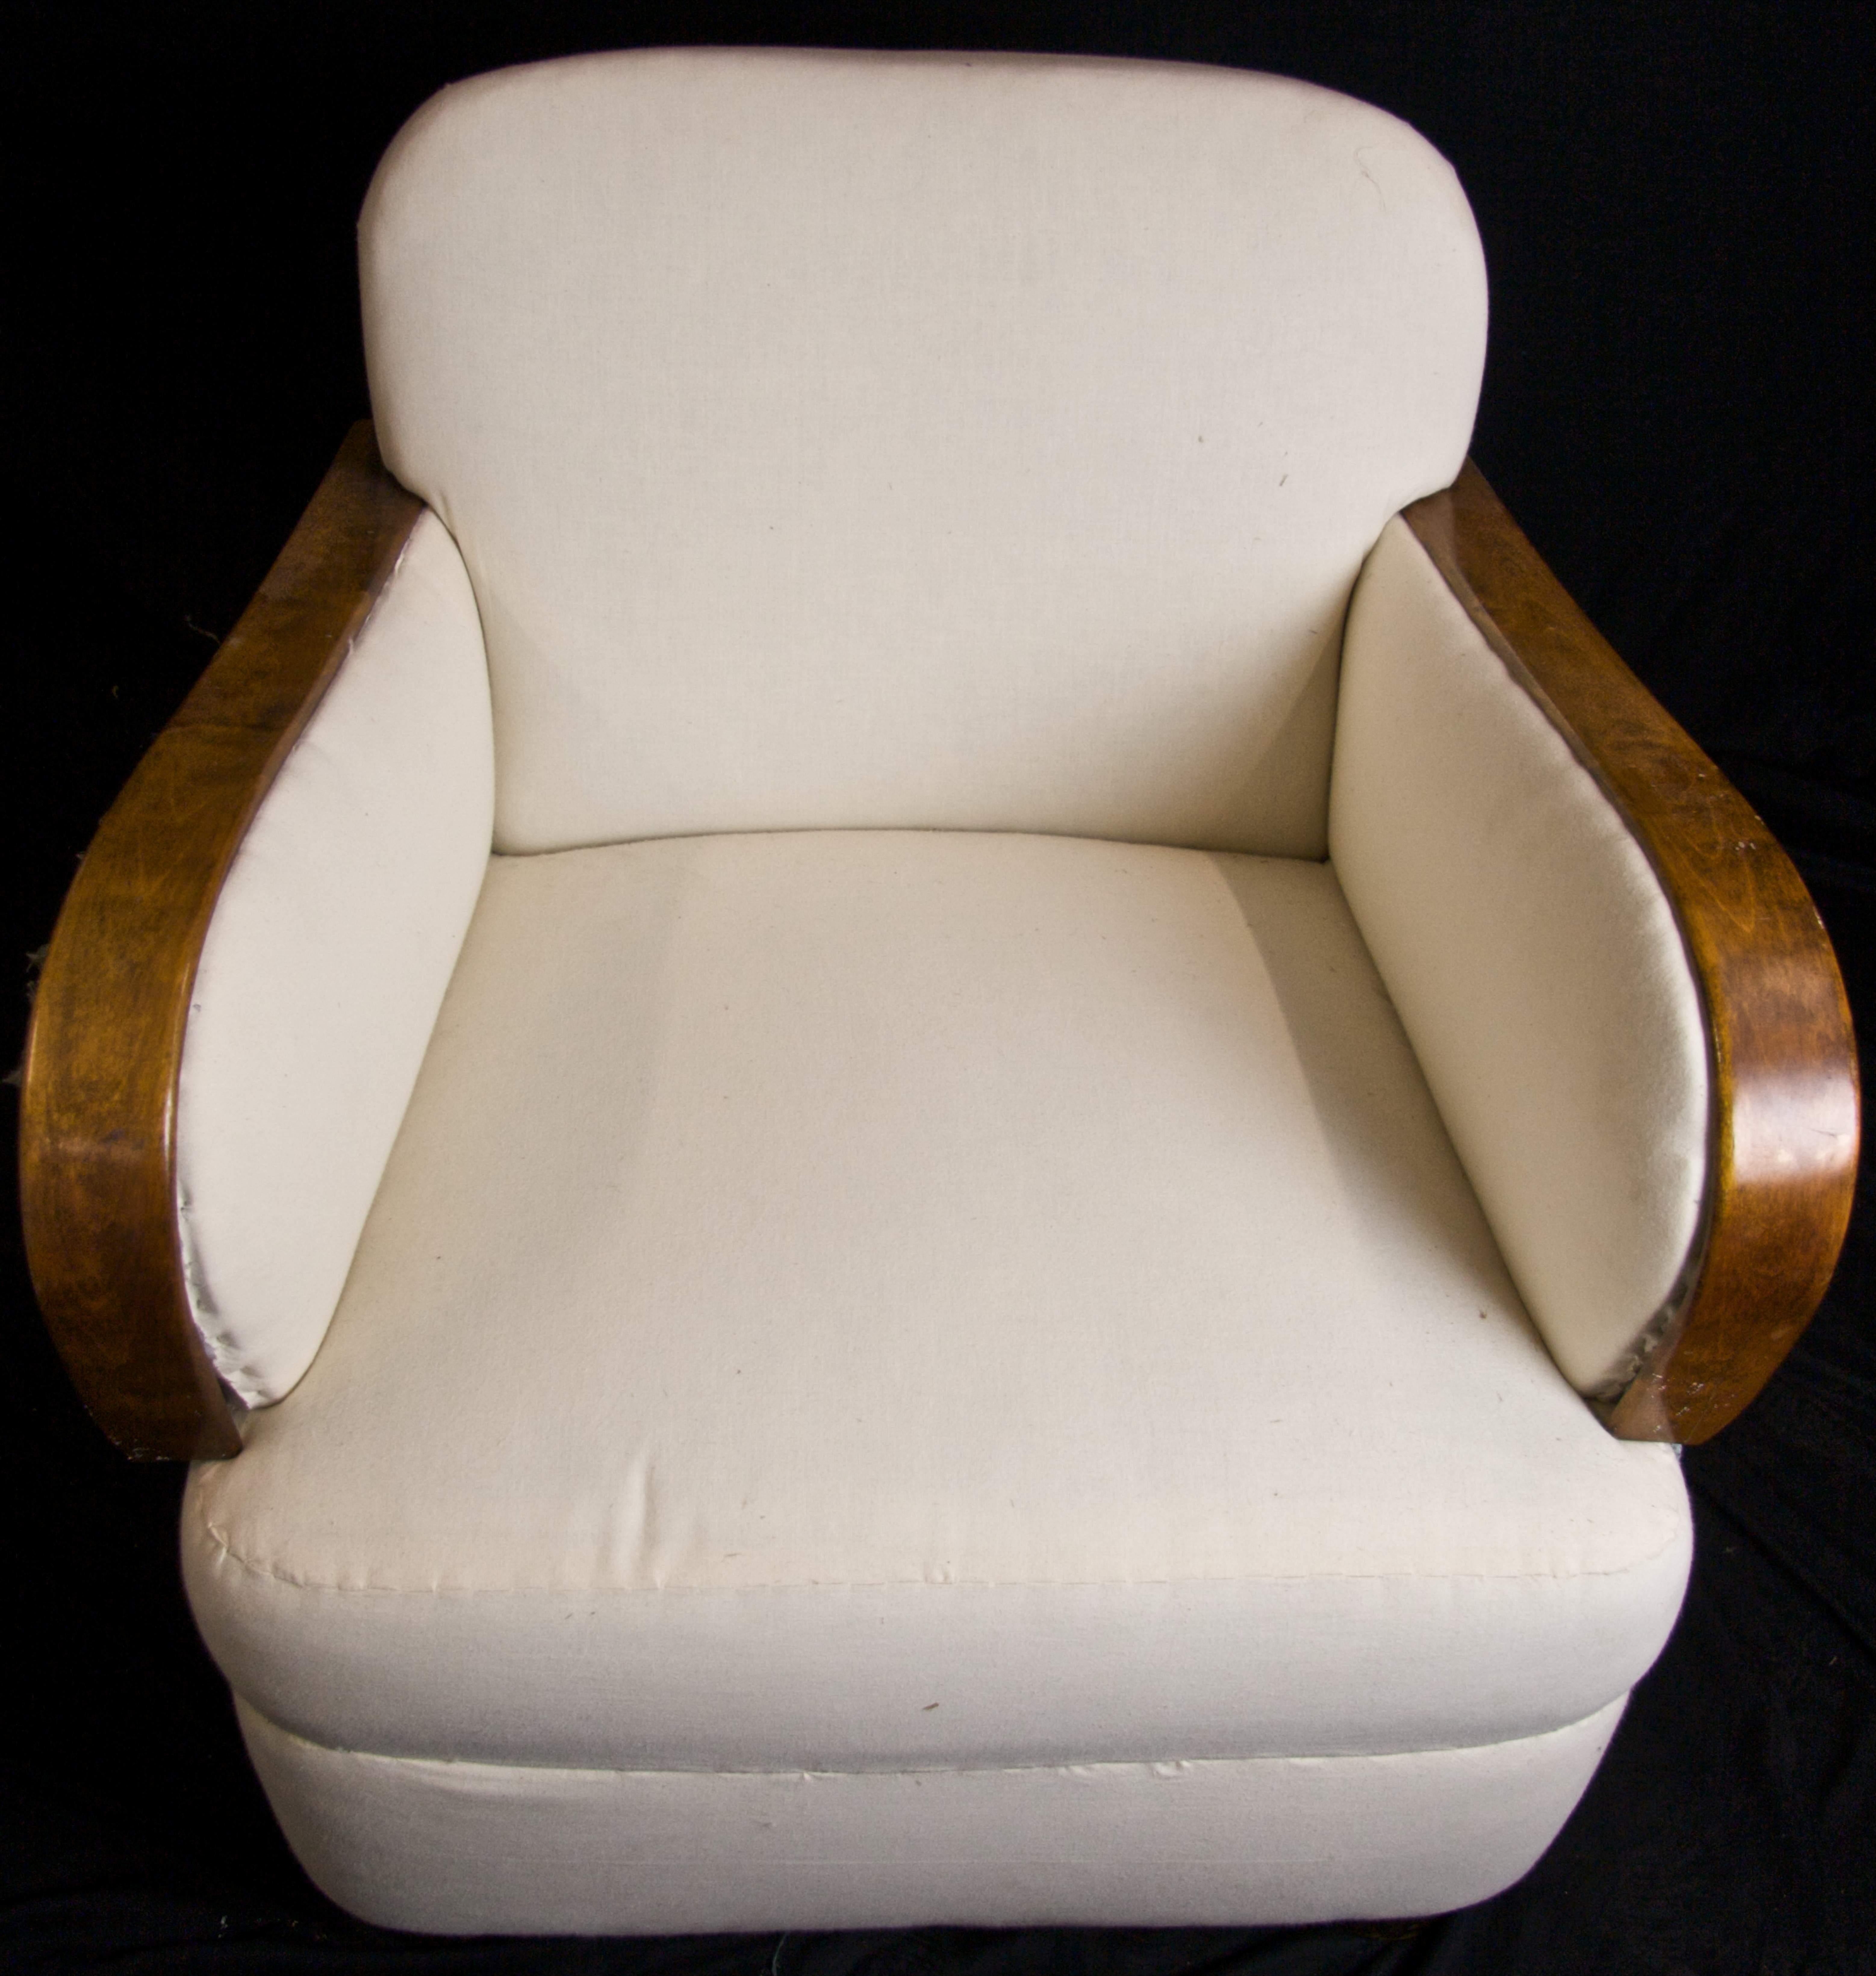 This is an unusual pair of original Swedish Art Deco armchairs with deep padded seats and back and shorter golden birch bentwood arms in a rich honey color French polish finish.

The extra deep fully sprung seats on these armchairs make for a great